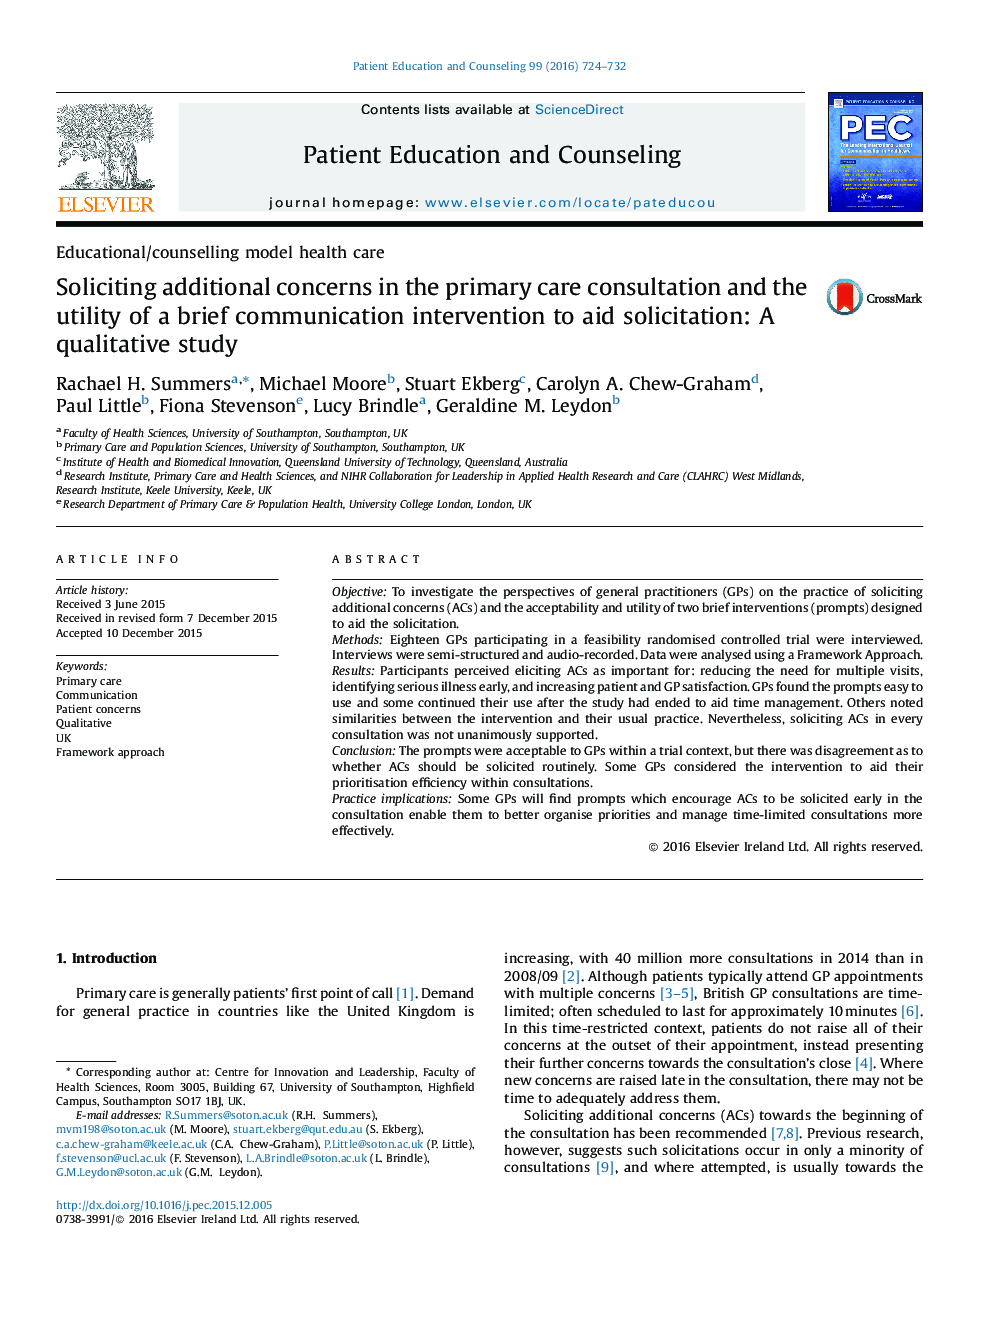 Soliciting additional concerns in the primary care consultation and the utility of a brief communication intervention to aid solicitation: A qualitative study